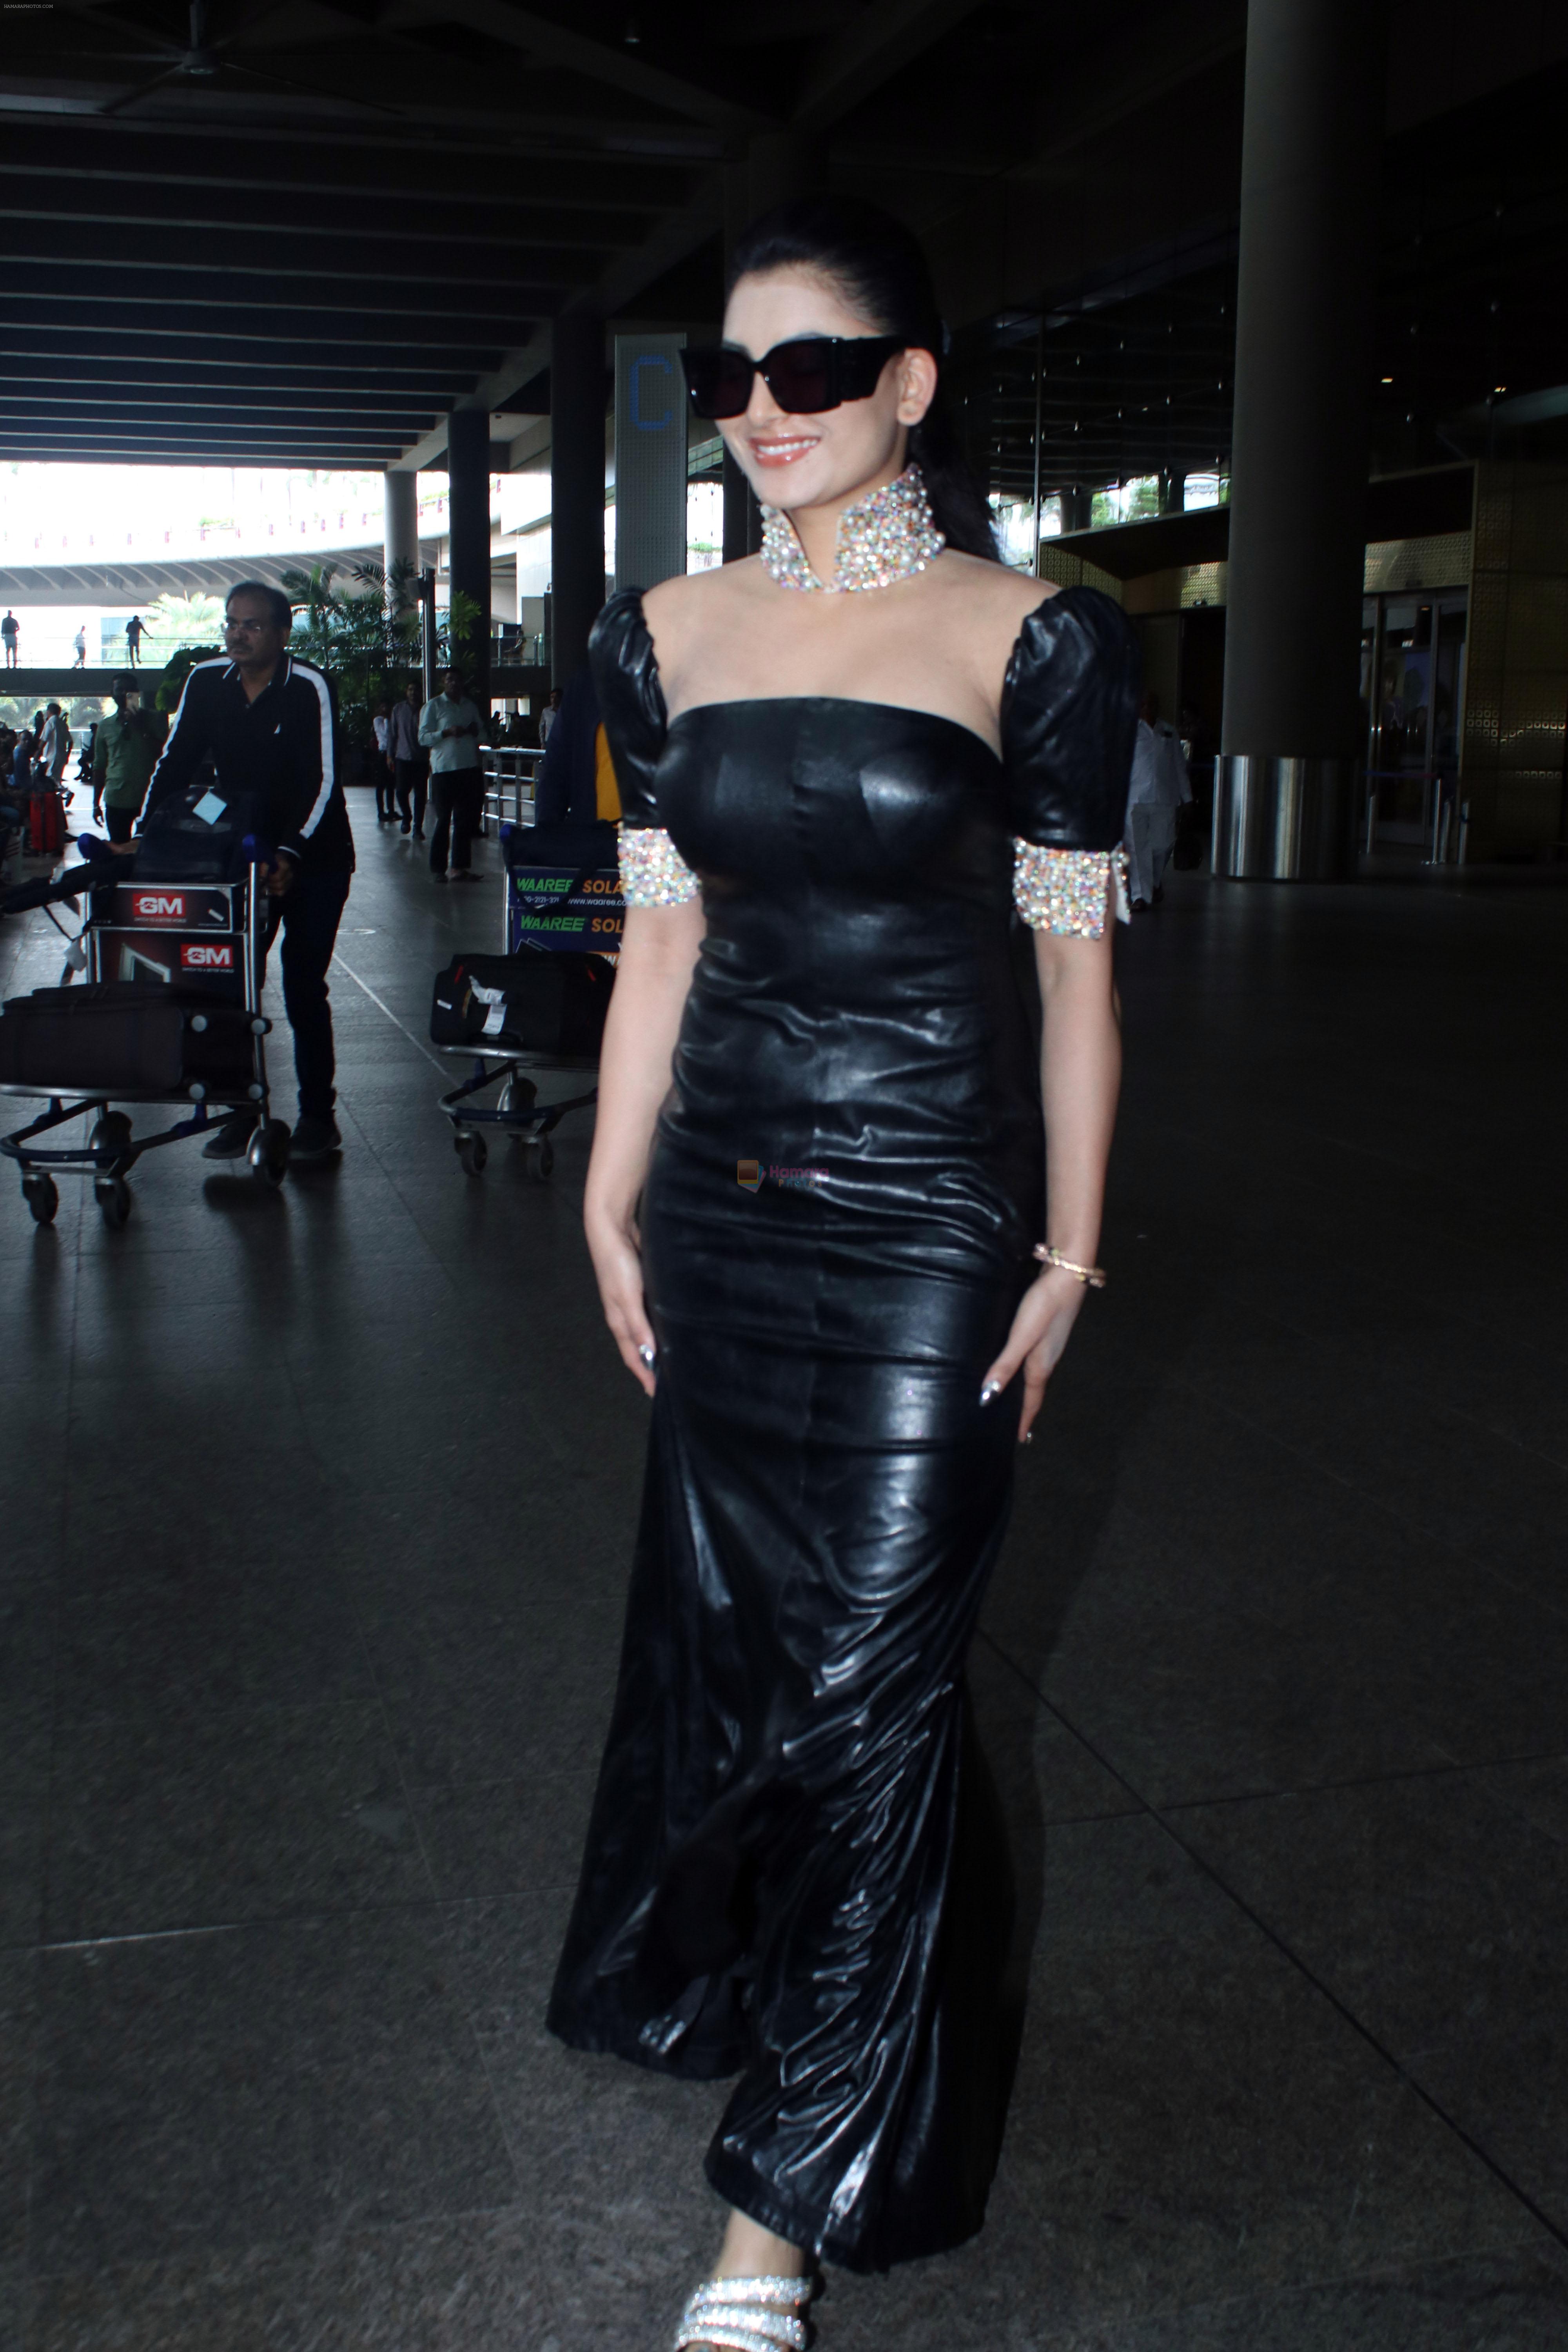 Urvashi Rautela dressed in Black seen at the airport on 13 July 2023